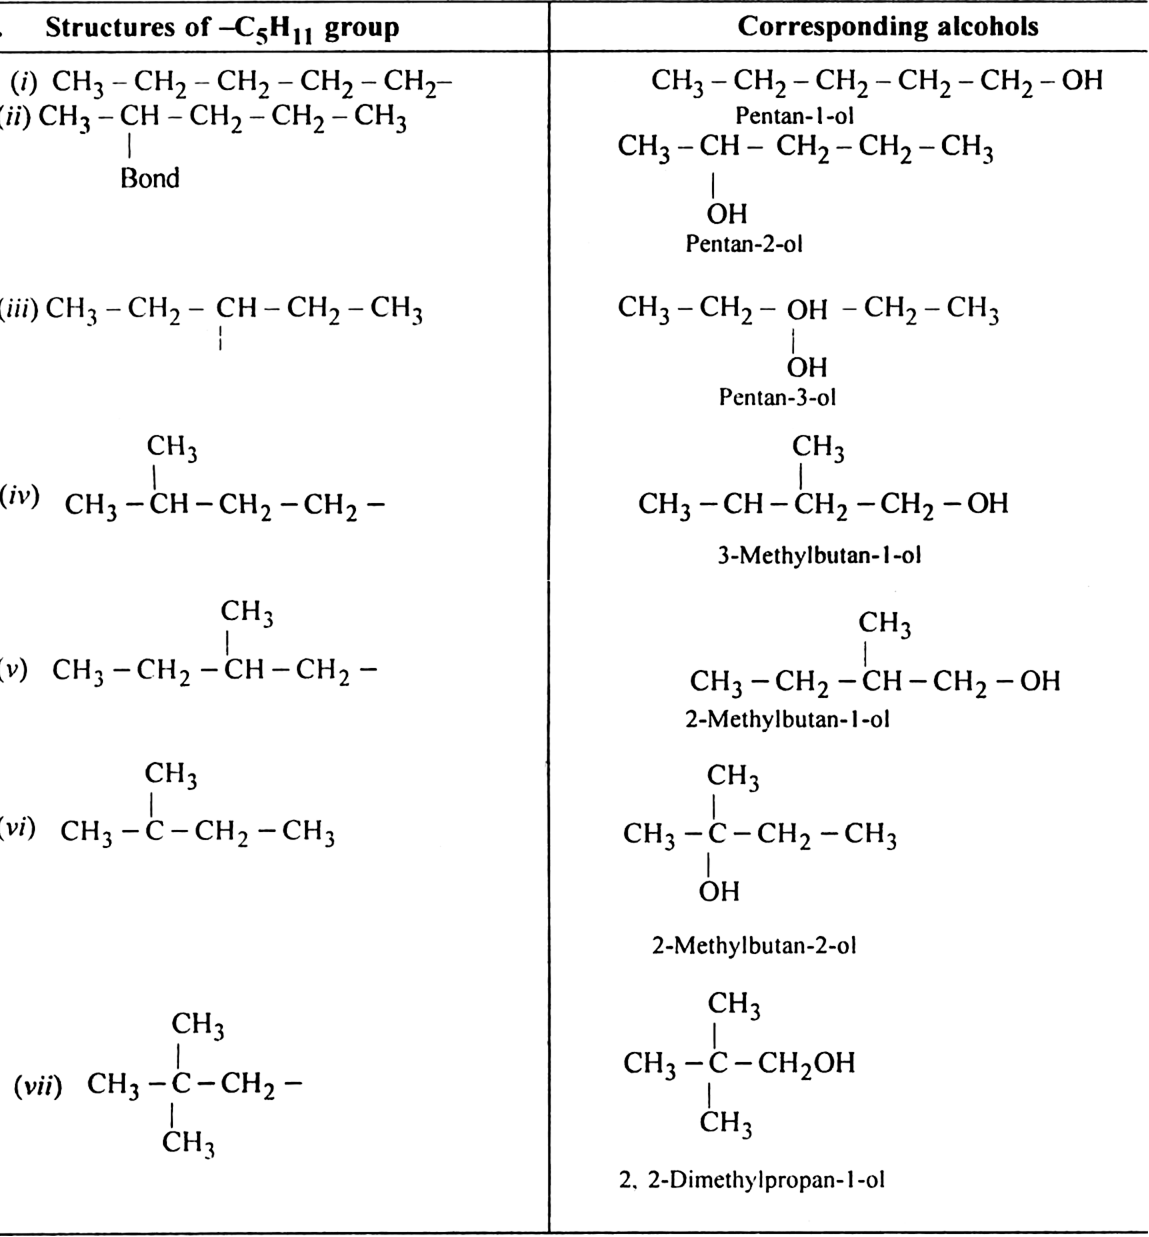 Write structures of different isomeric alkyl groups corresponding